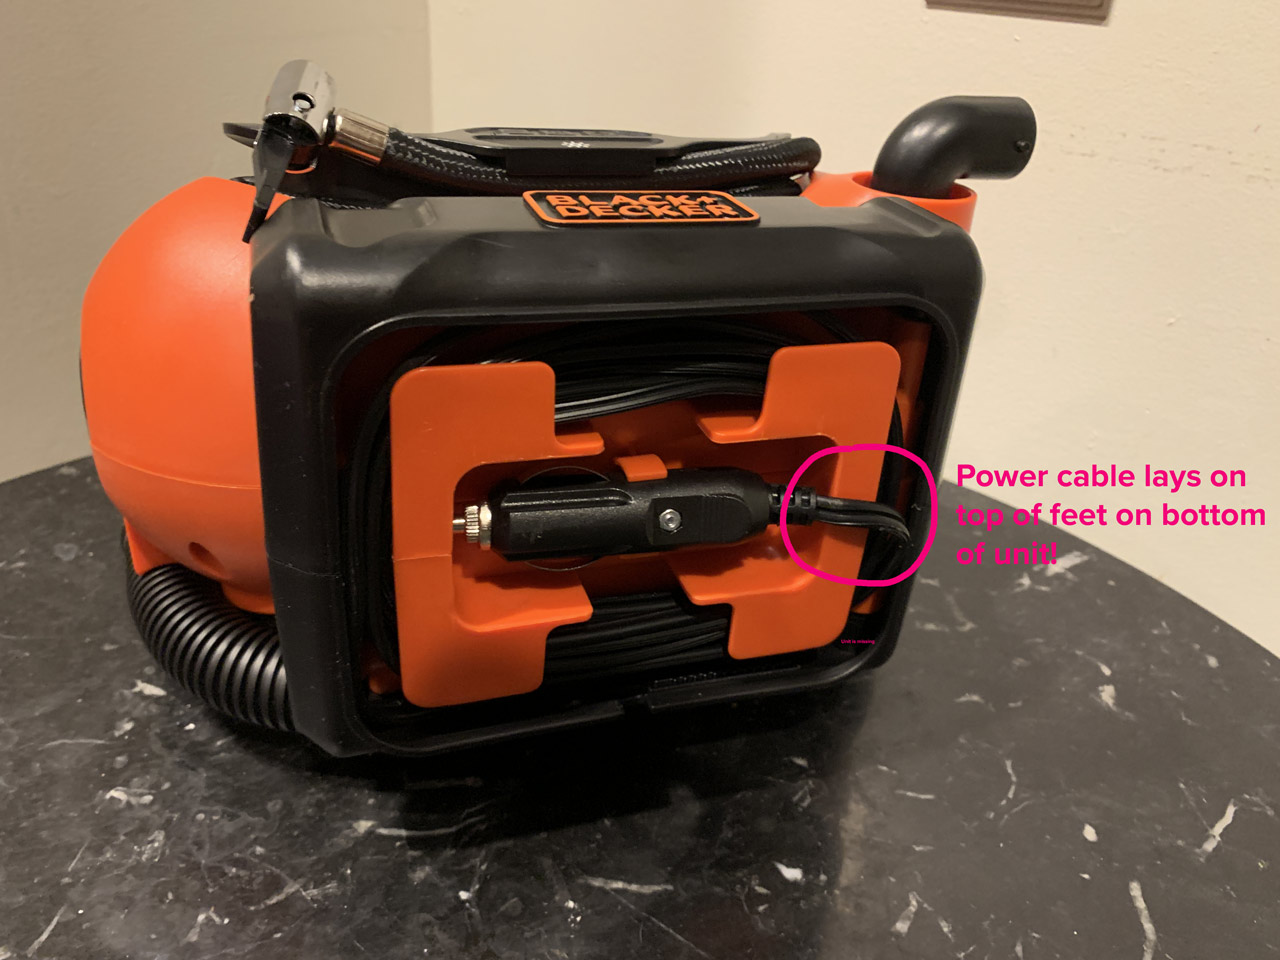 Black & Decker 20V MAX Multi-Purpose Inflator power cable covers the foot on the bottom of the unit